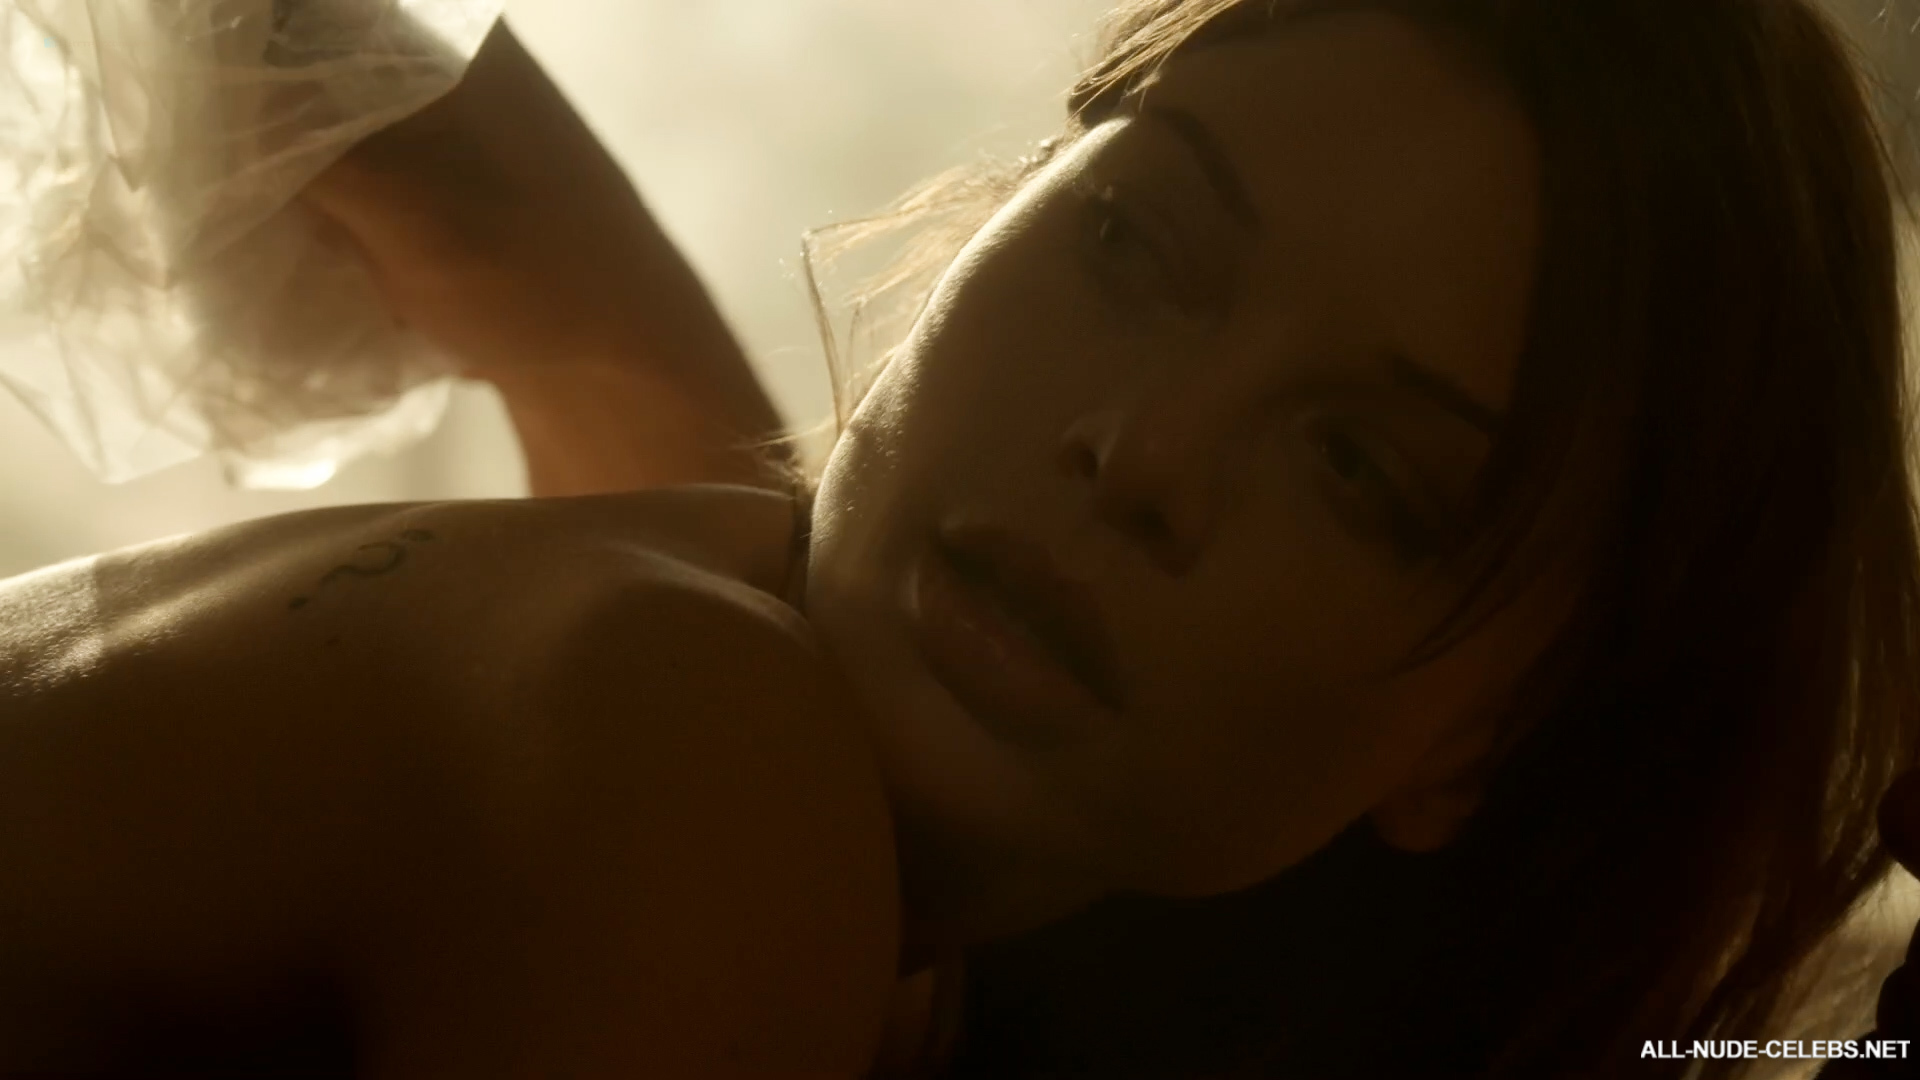 Lauren german full leaked collection at bannedsextapes.com.